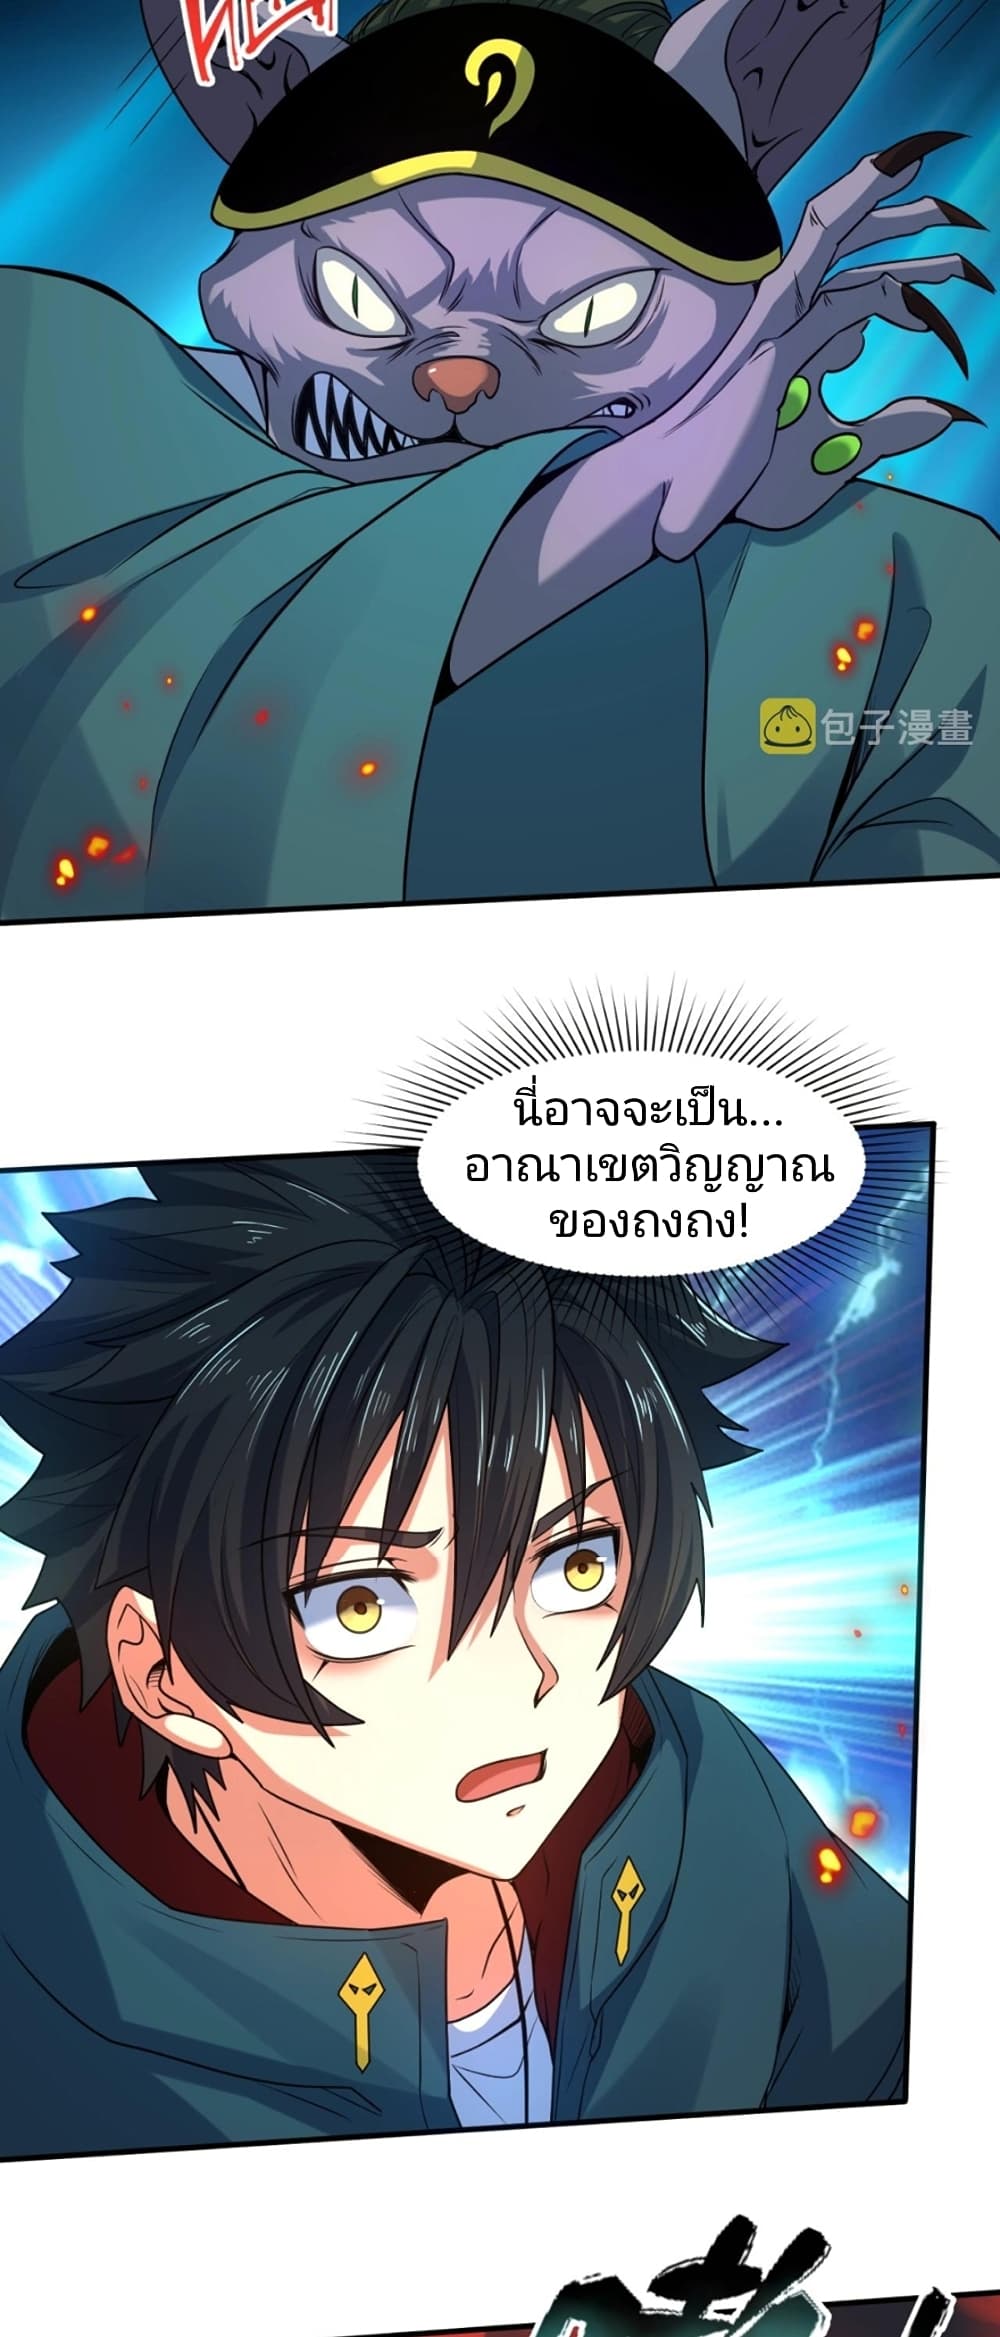 The Age of Ghost Spirits à¸à¸­à¸à¸à¸µà¹ 10 (49)